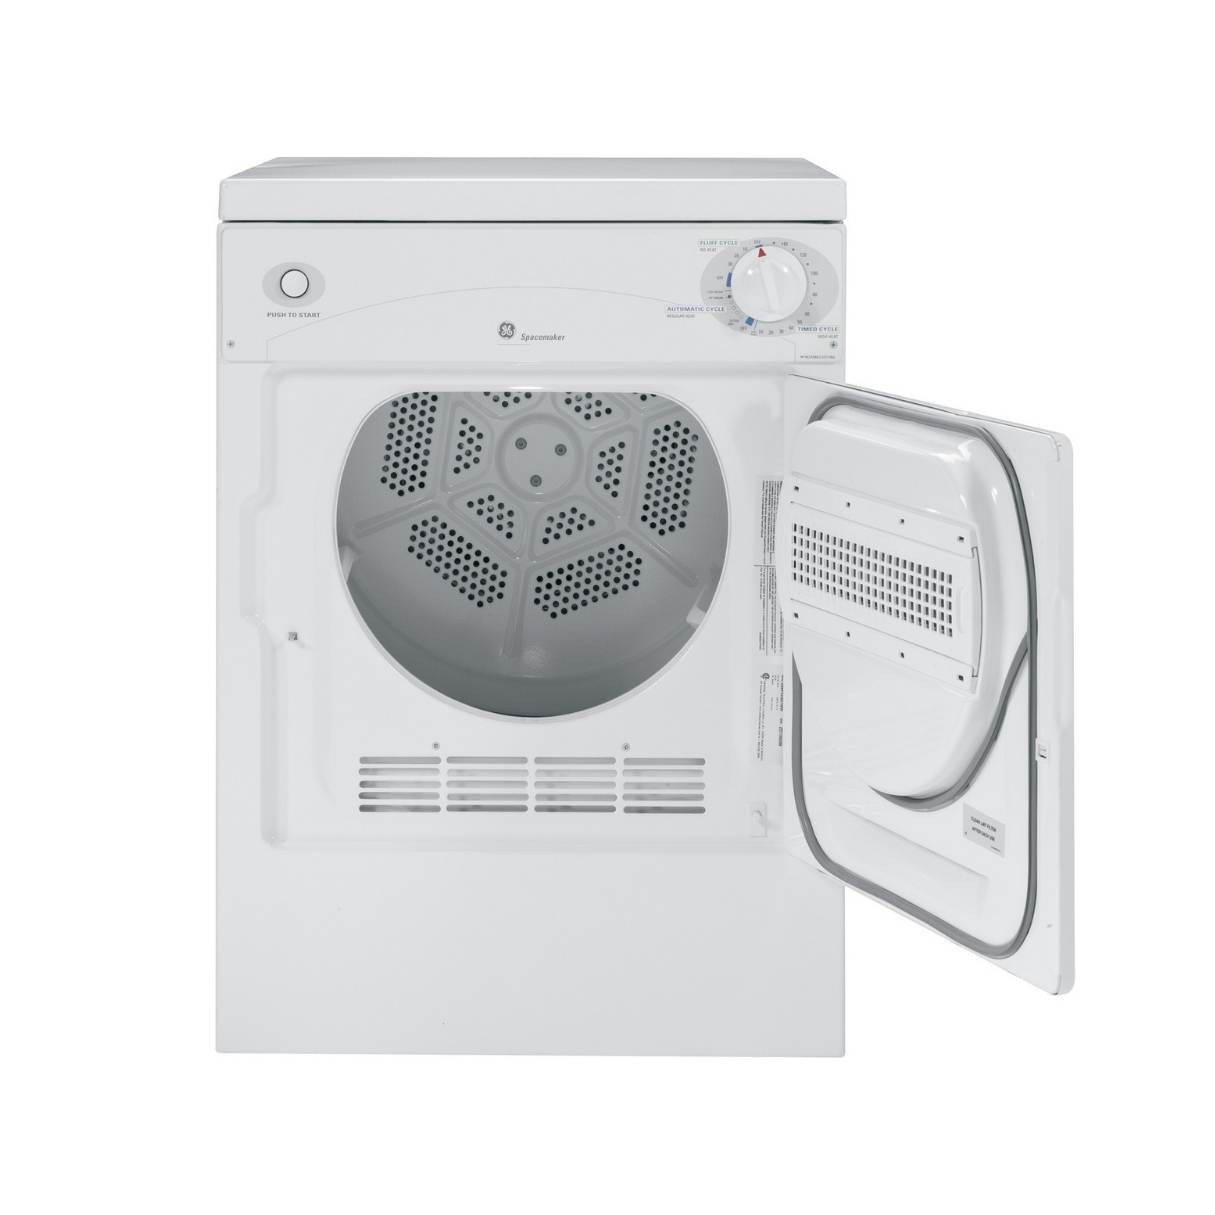 How To Fix The Error Code E63 For GE Dryer